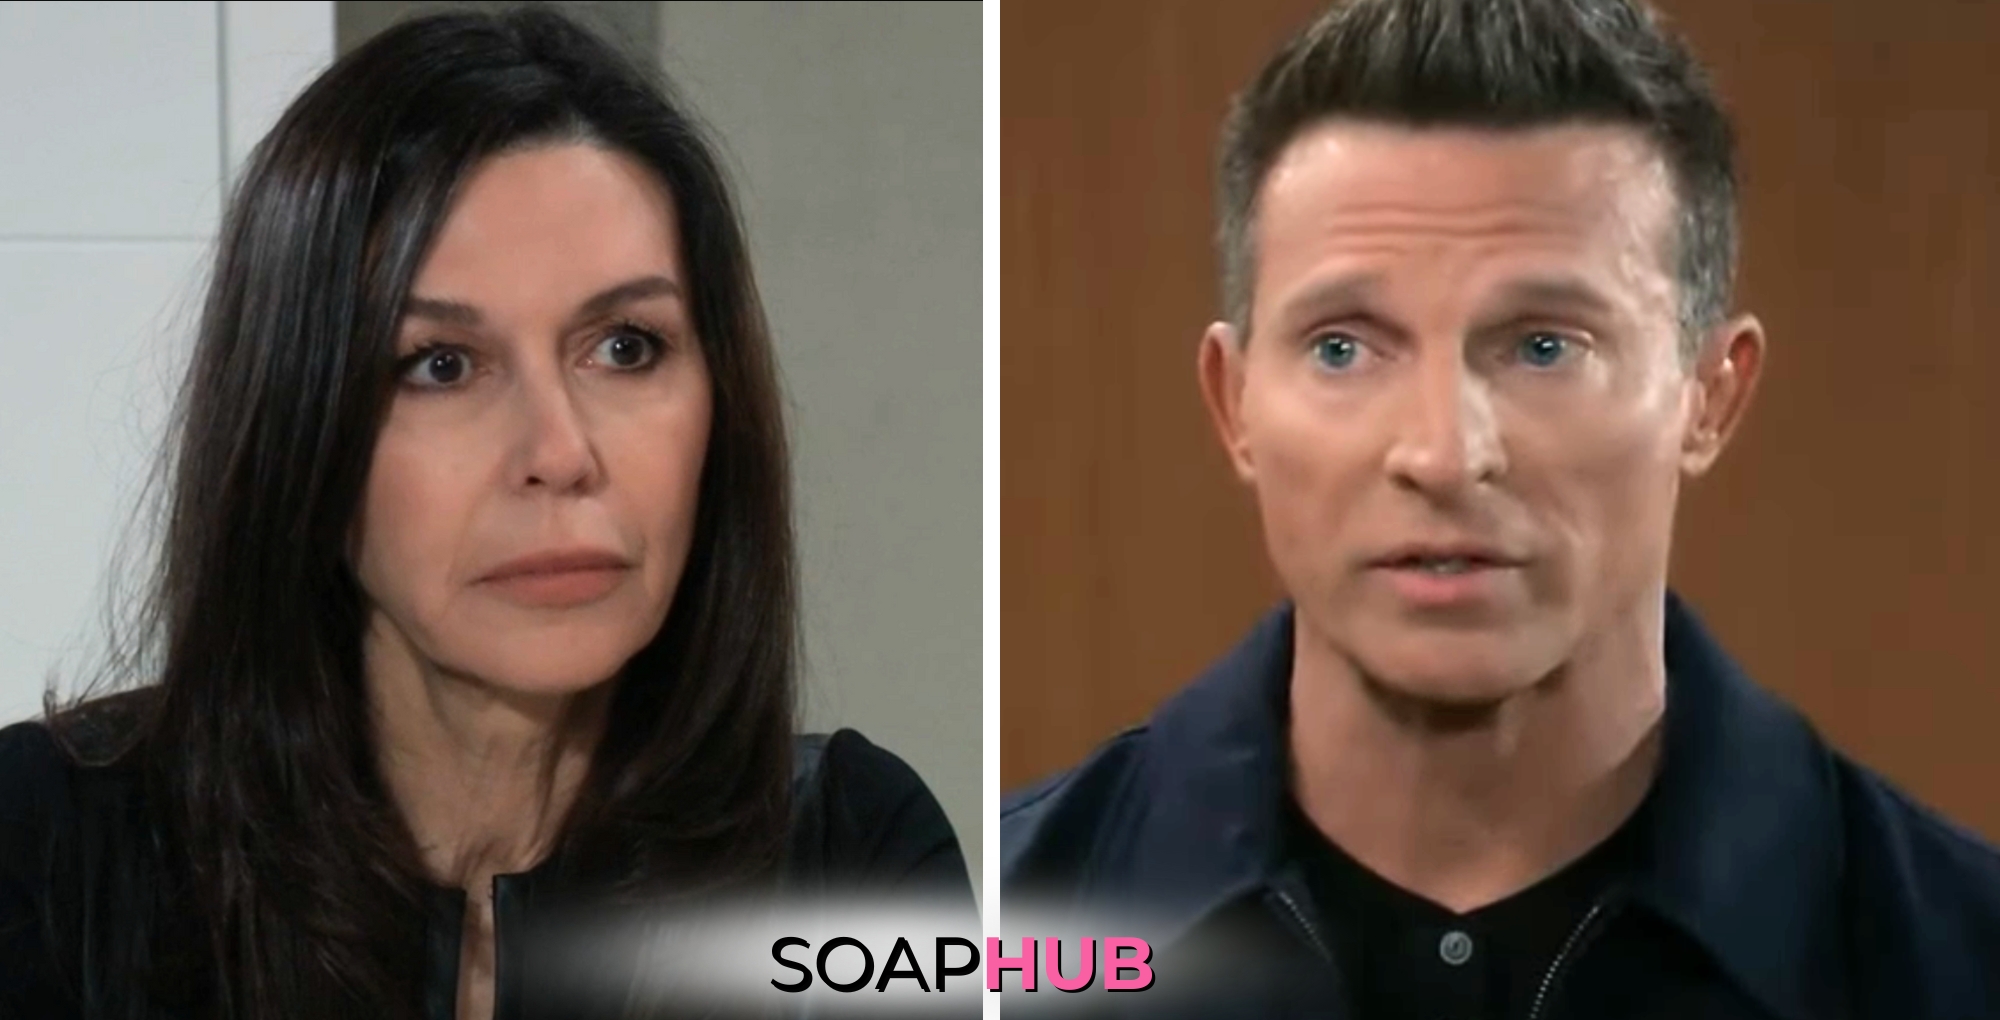 On General Hospital, the May 8 spoilers focus on Jason telling Anna what Cates has on him, with the Soap Hub logo across the bottom.